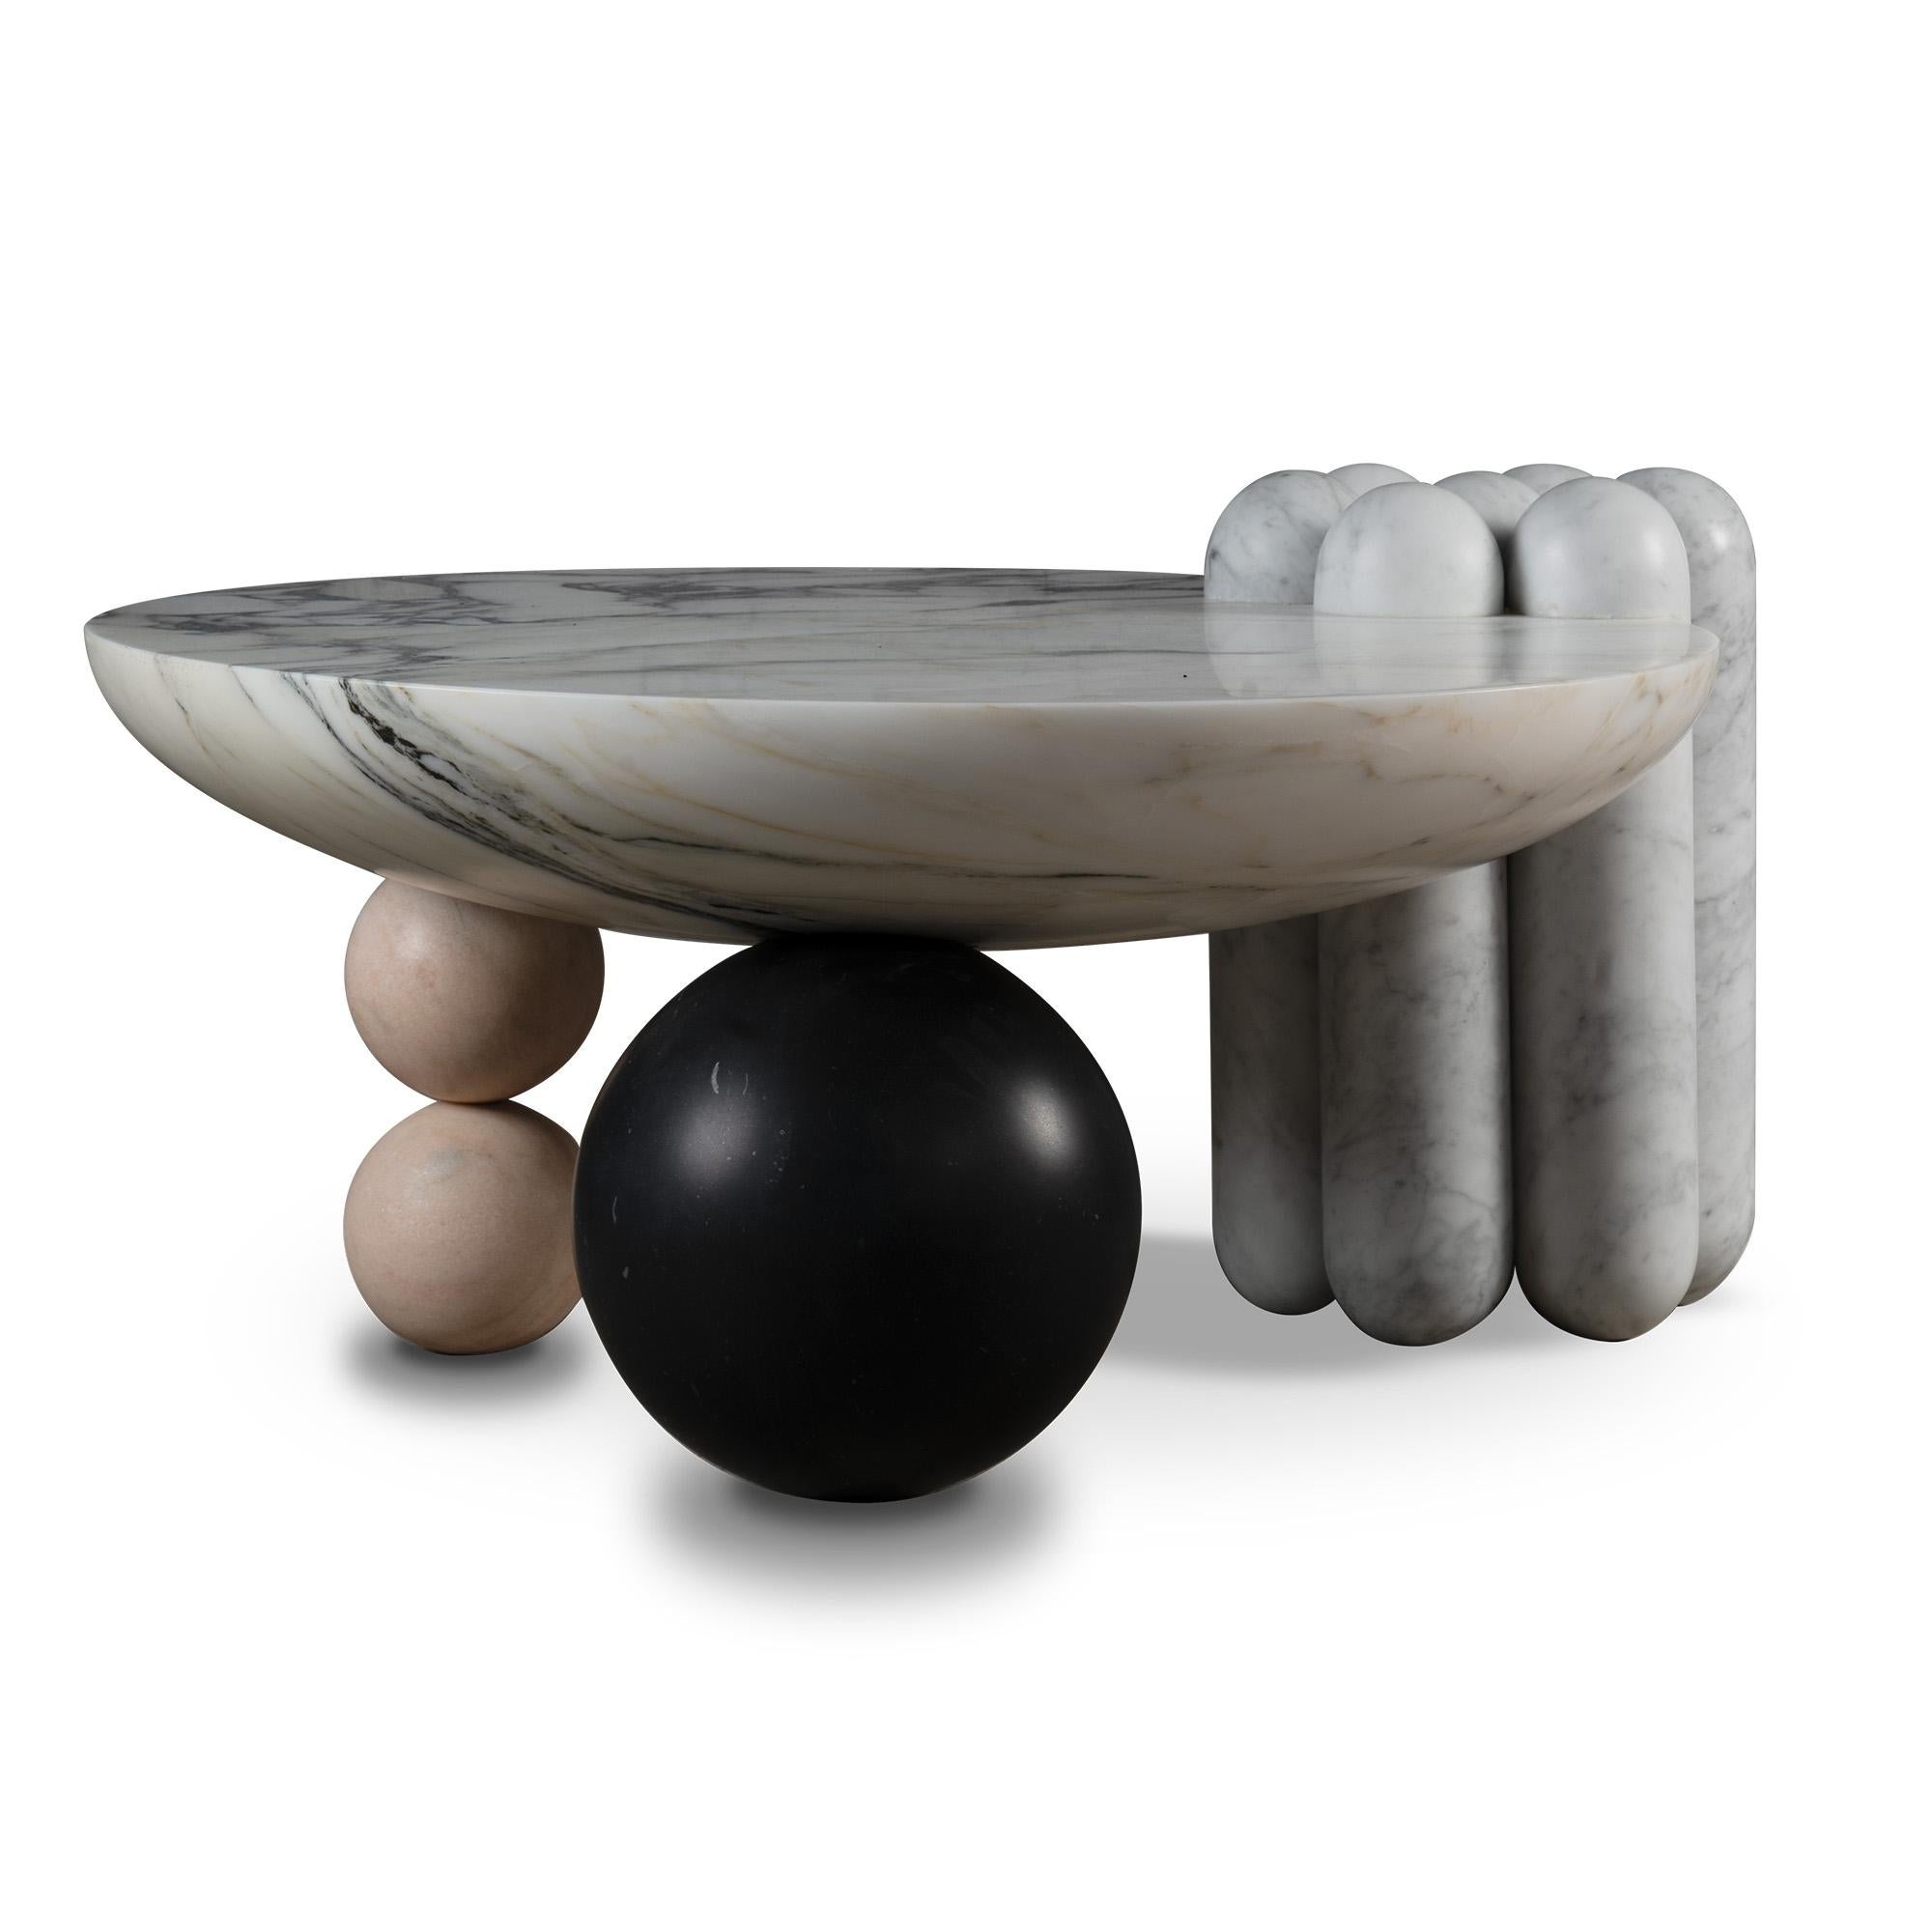 Patisserie marble coffee table is an ensemble of different patisserie inspired shapes - a canelé like side leg and two bonbon legs lift a cupped table top for a pleasingly asymmetric, almost haphazard assembly. The table is milled from arrabescato